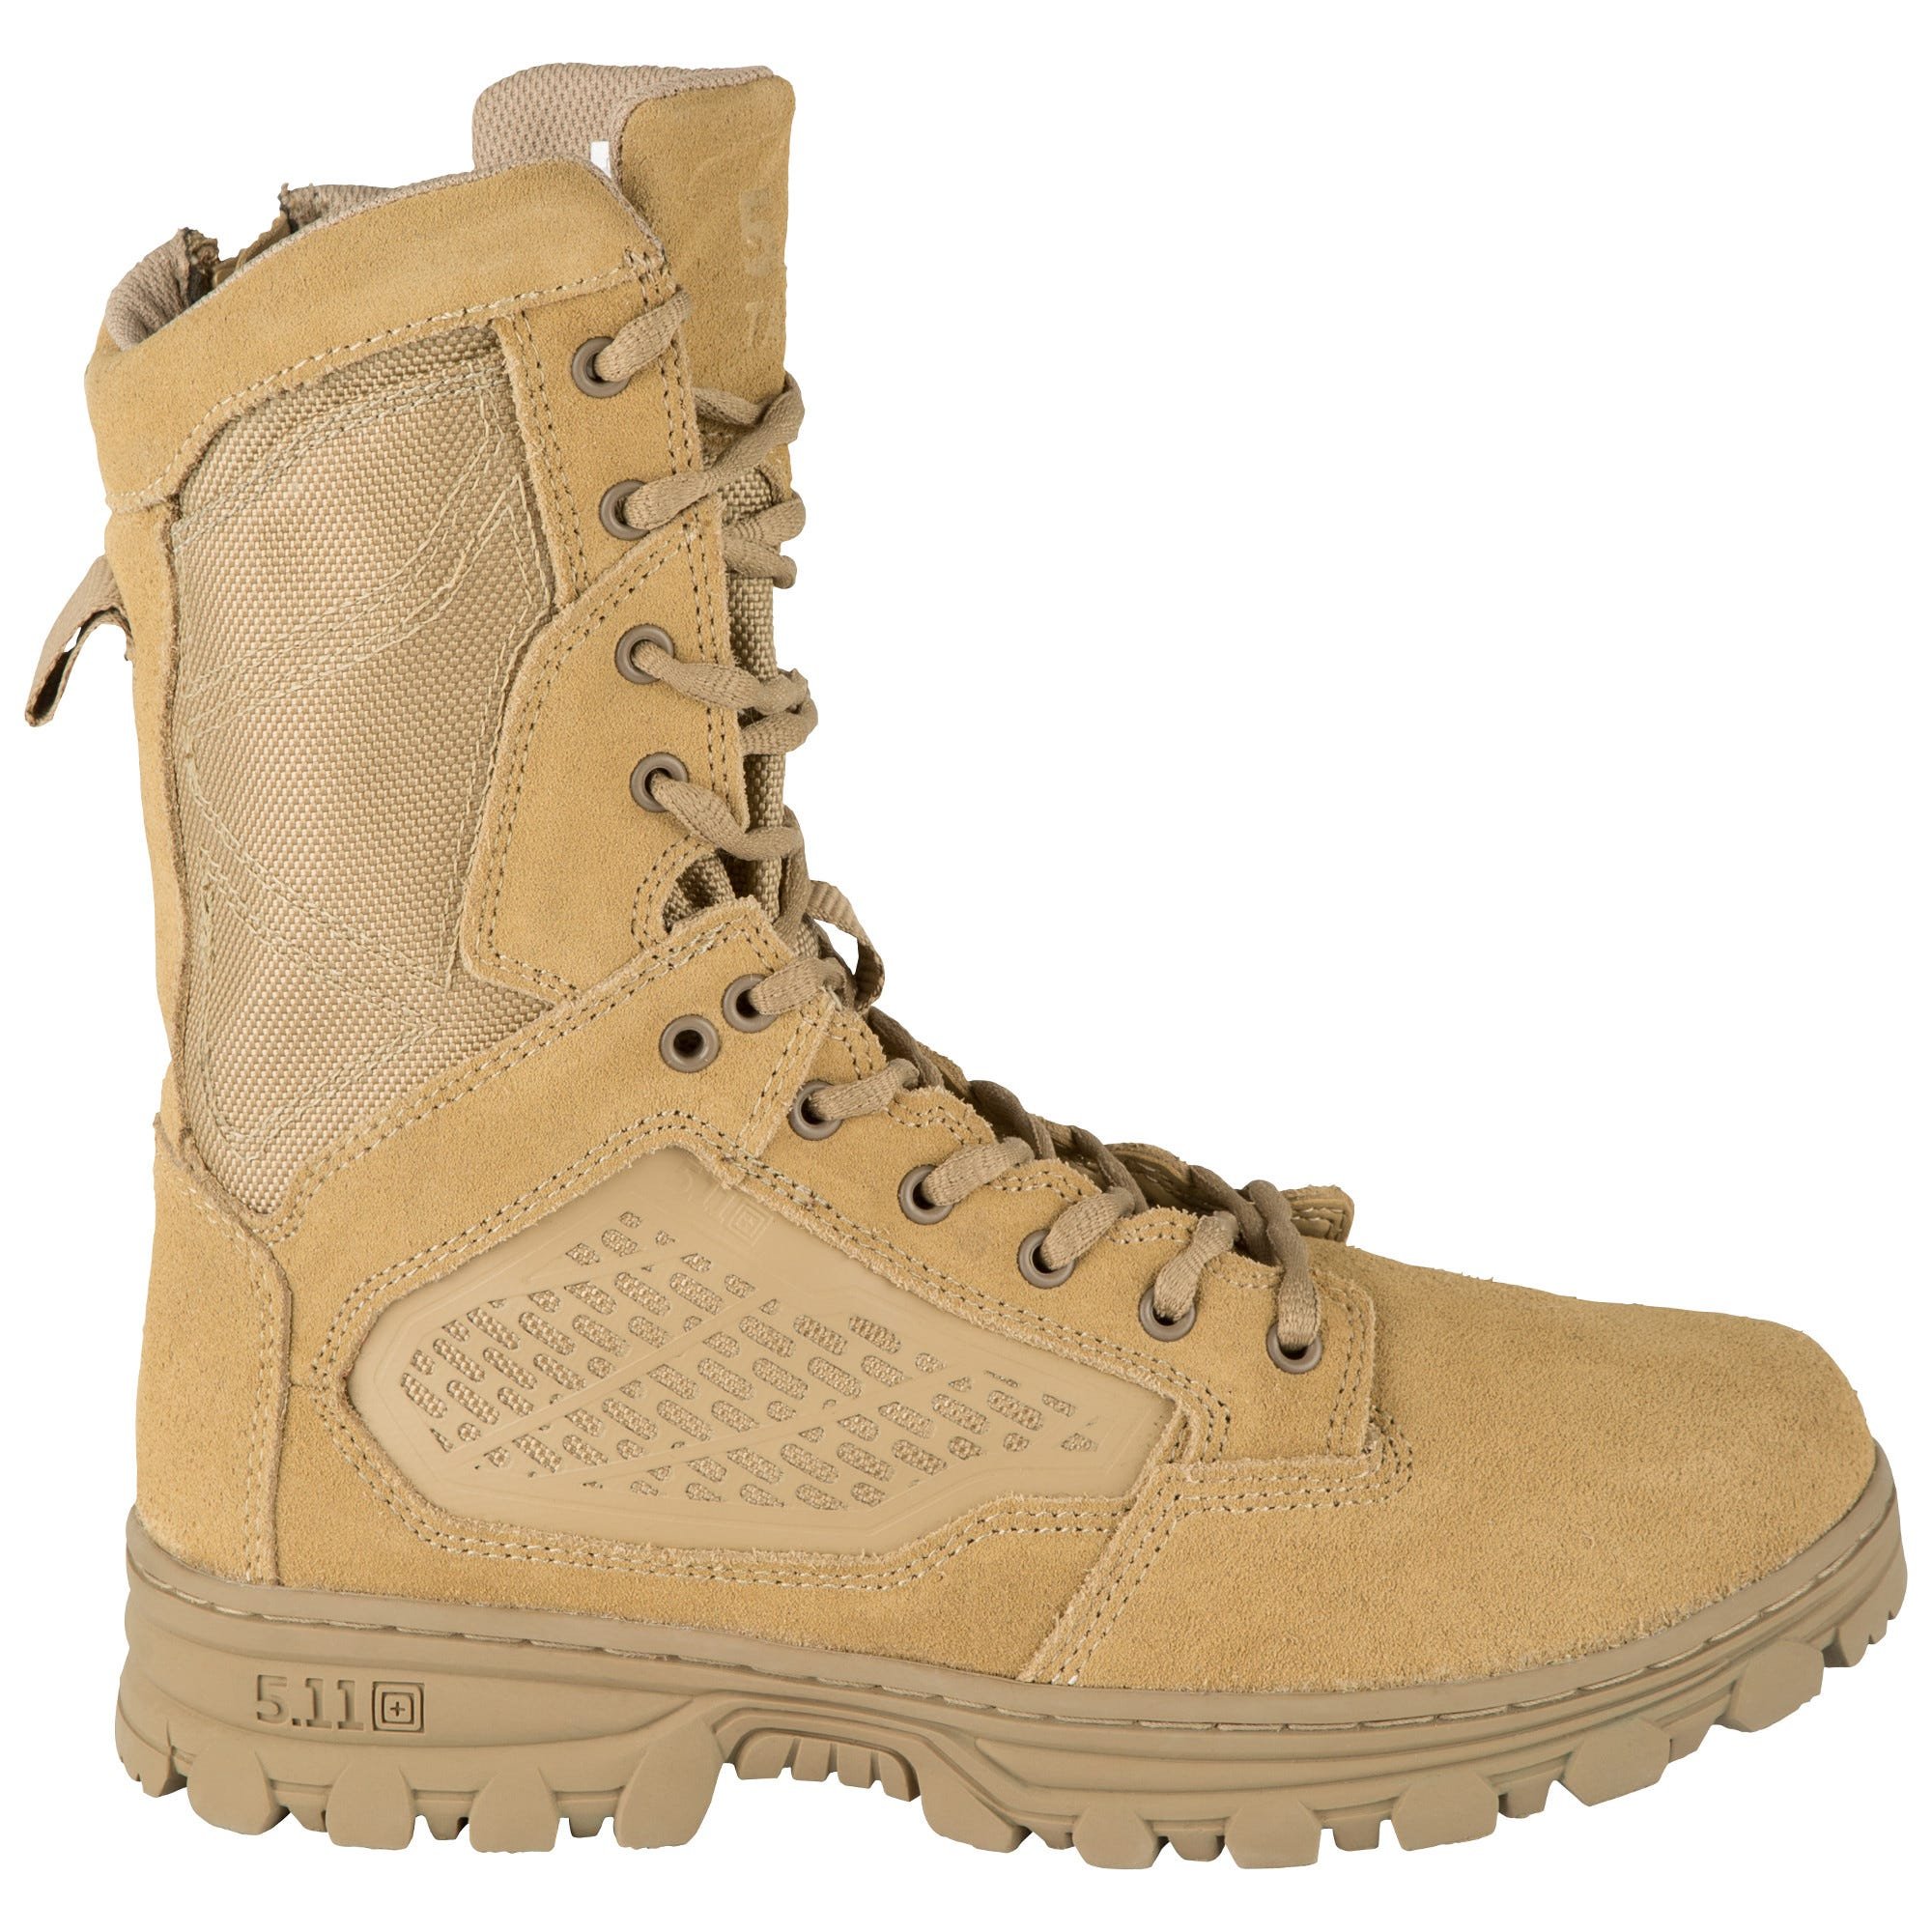 5.11 Work Gear EVO 8-Inch Waterproof Boots, Oil/Slip-Resistant, OrthoLite Insole, Coyote, 15/Regular, Style 12347 - image 3 of 4